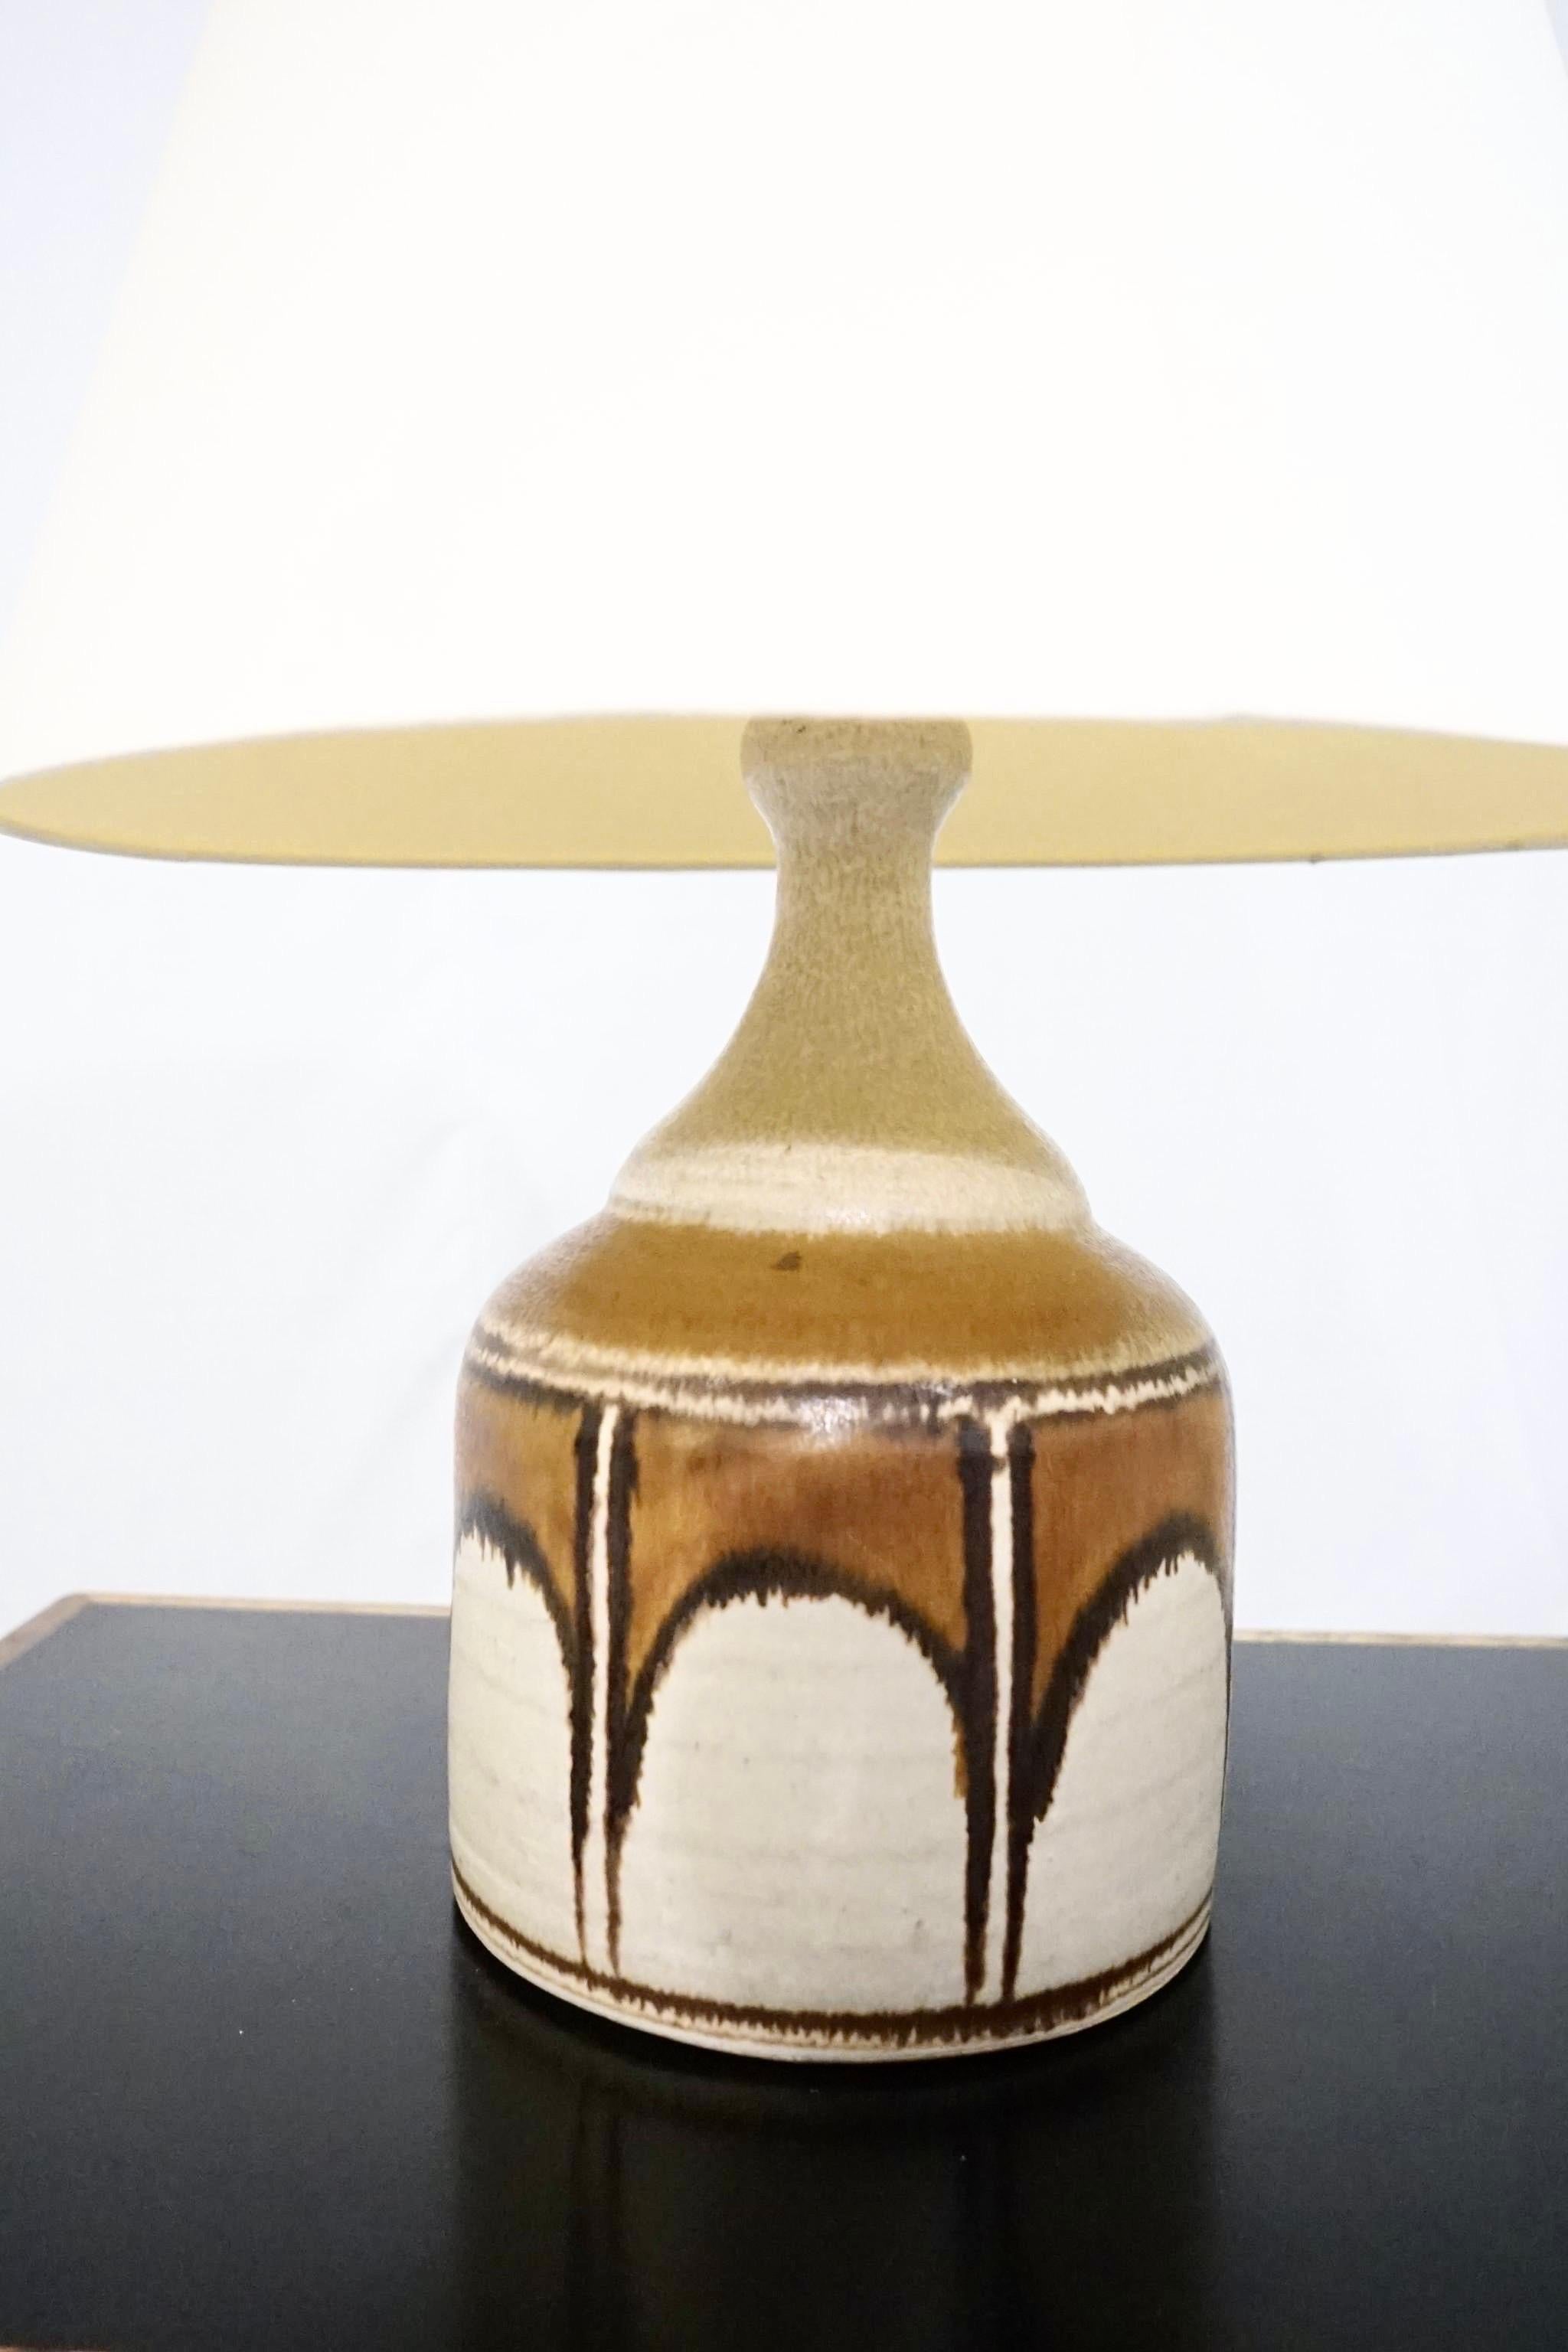 Rare Danish ceramic table lamp from the 1970’s.
The lamp is made by a unknown danish ceramic artist in the 1970’s and is the perfect decorative piece.
The lamp has the original wire and bulb socket right now but that can be changed if